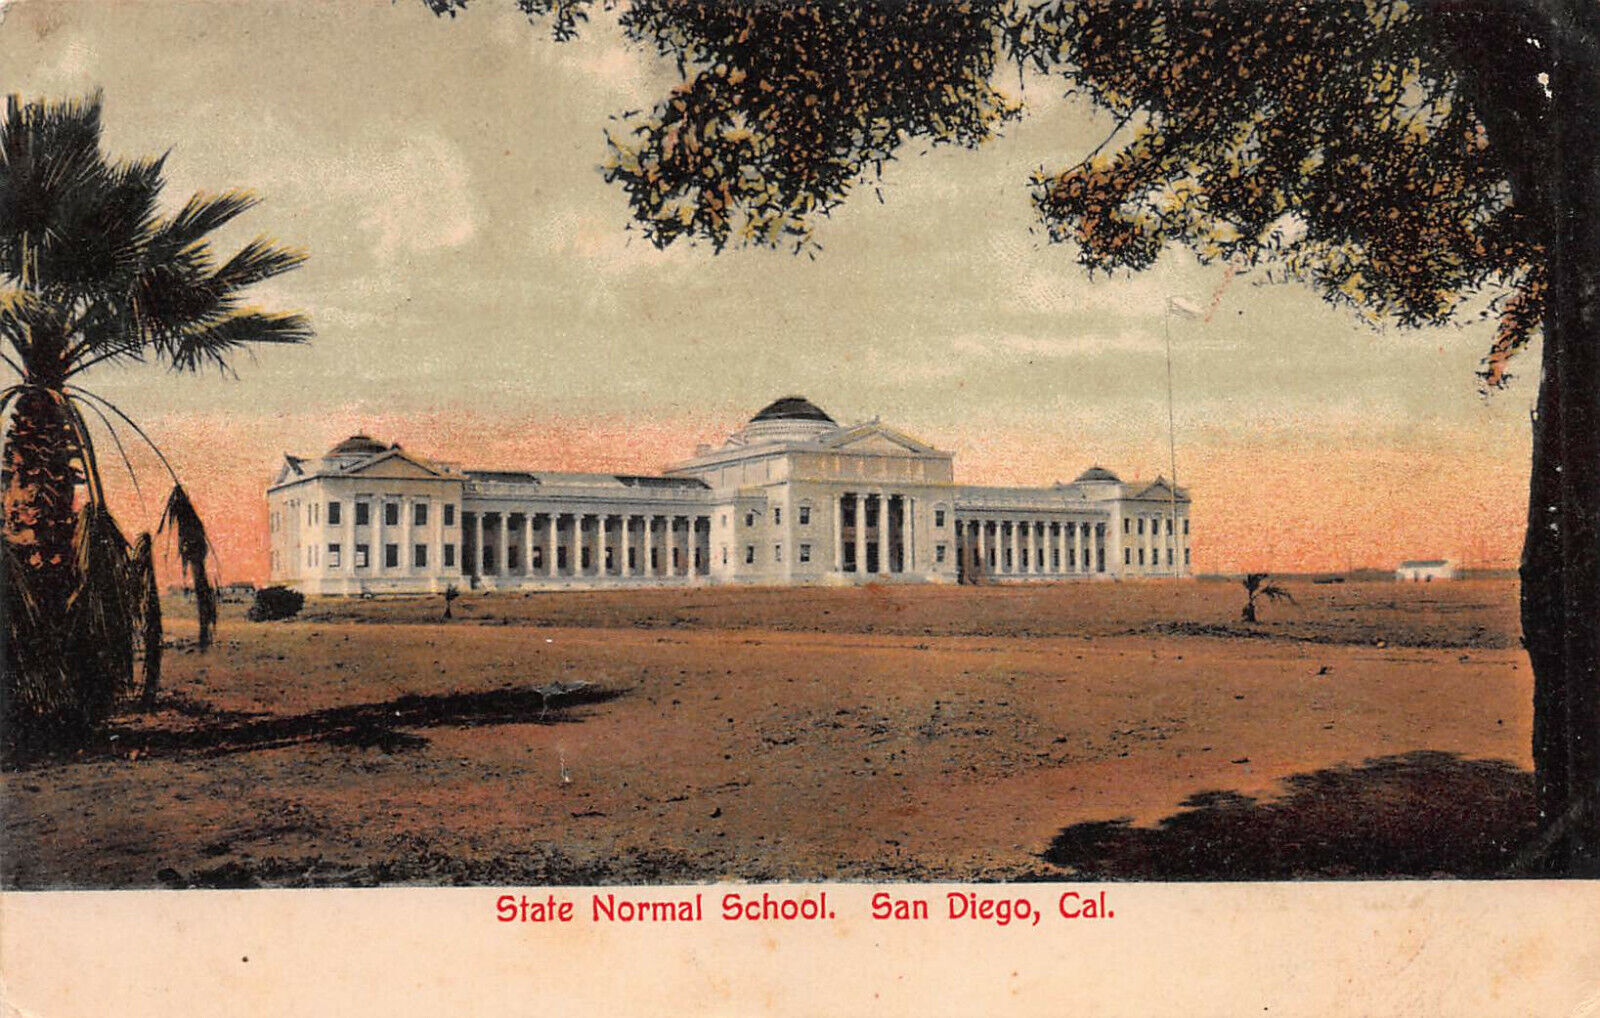 State Normal School, San Diego, California, Early Postcard, Used in 1908